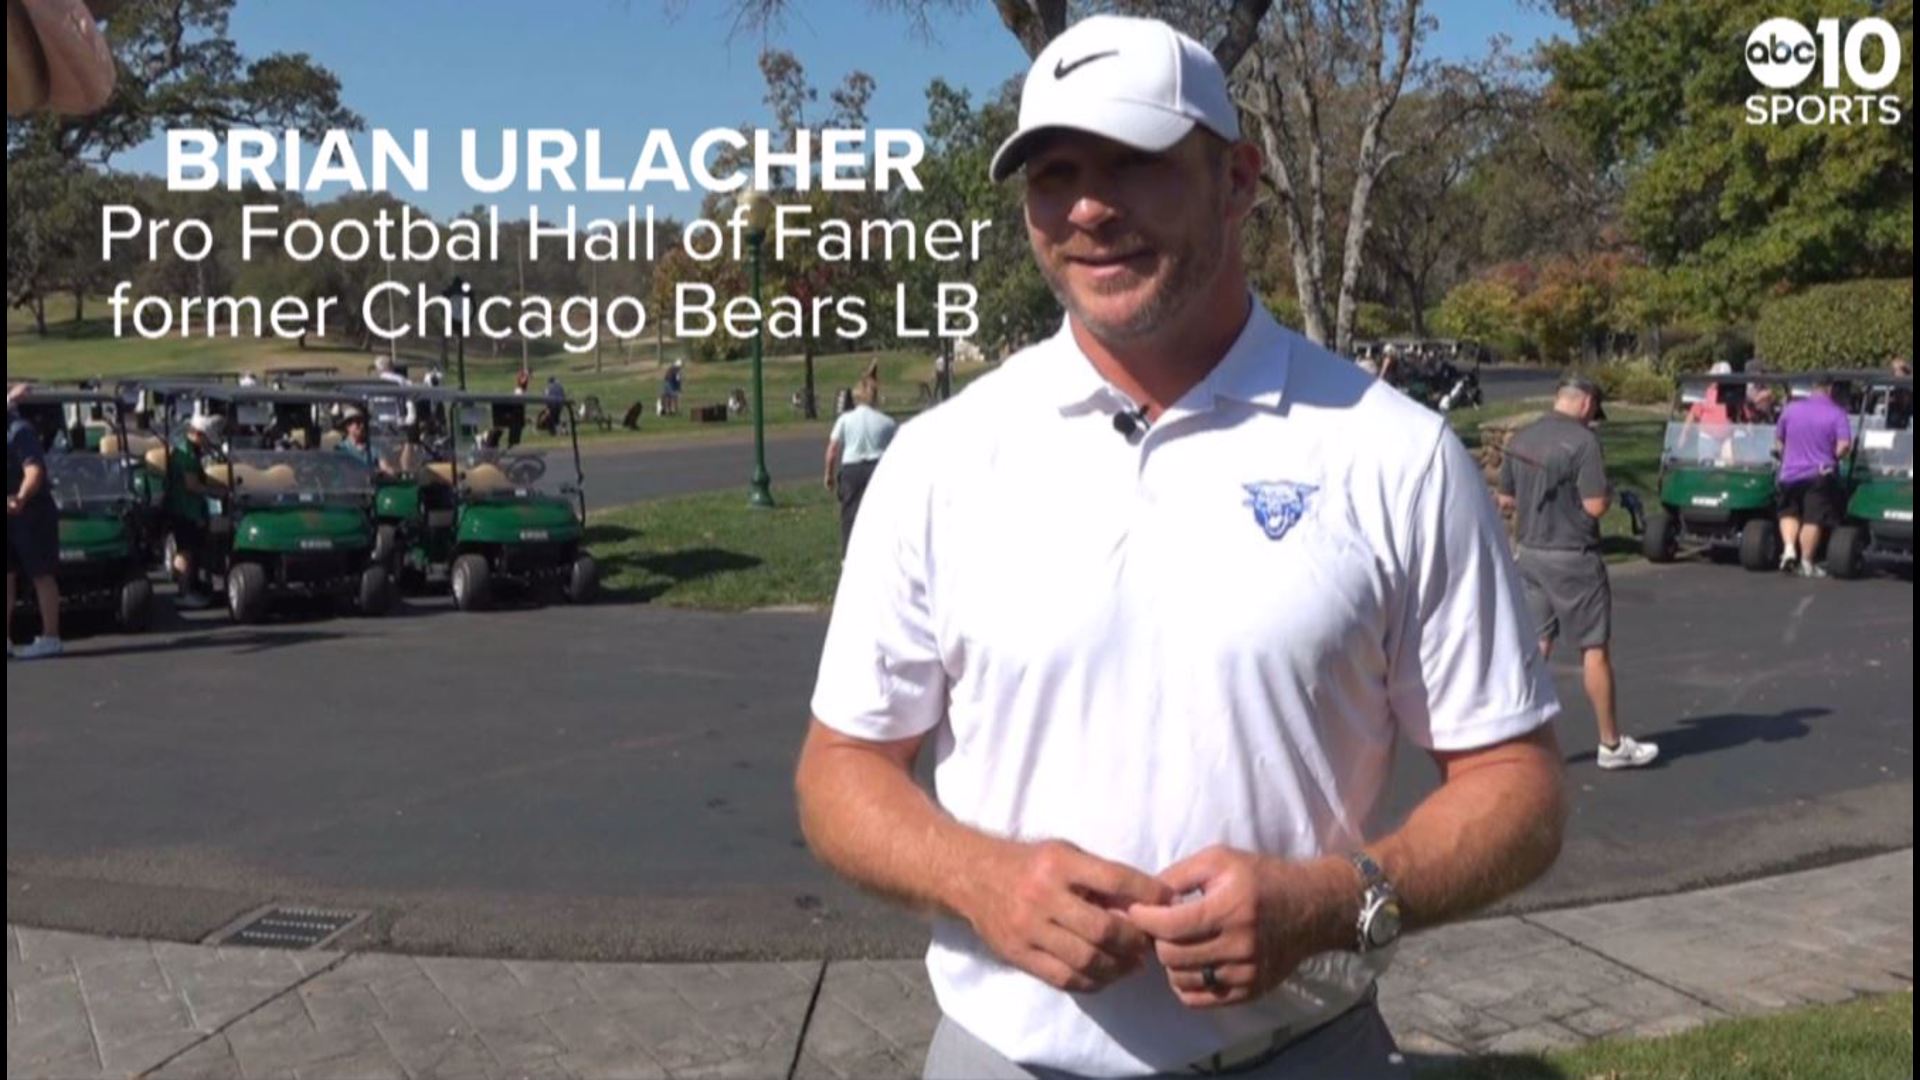 ABC10's Lina Washington catches up with Chicago Bears legend Brian Urlacher during his visit to Granite Bay Golf Course.